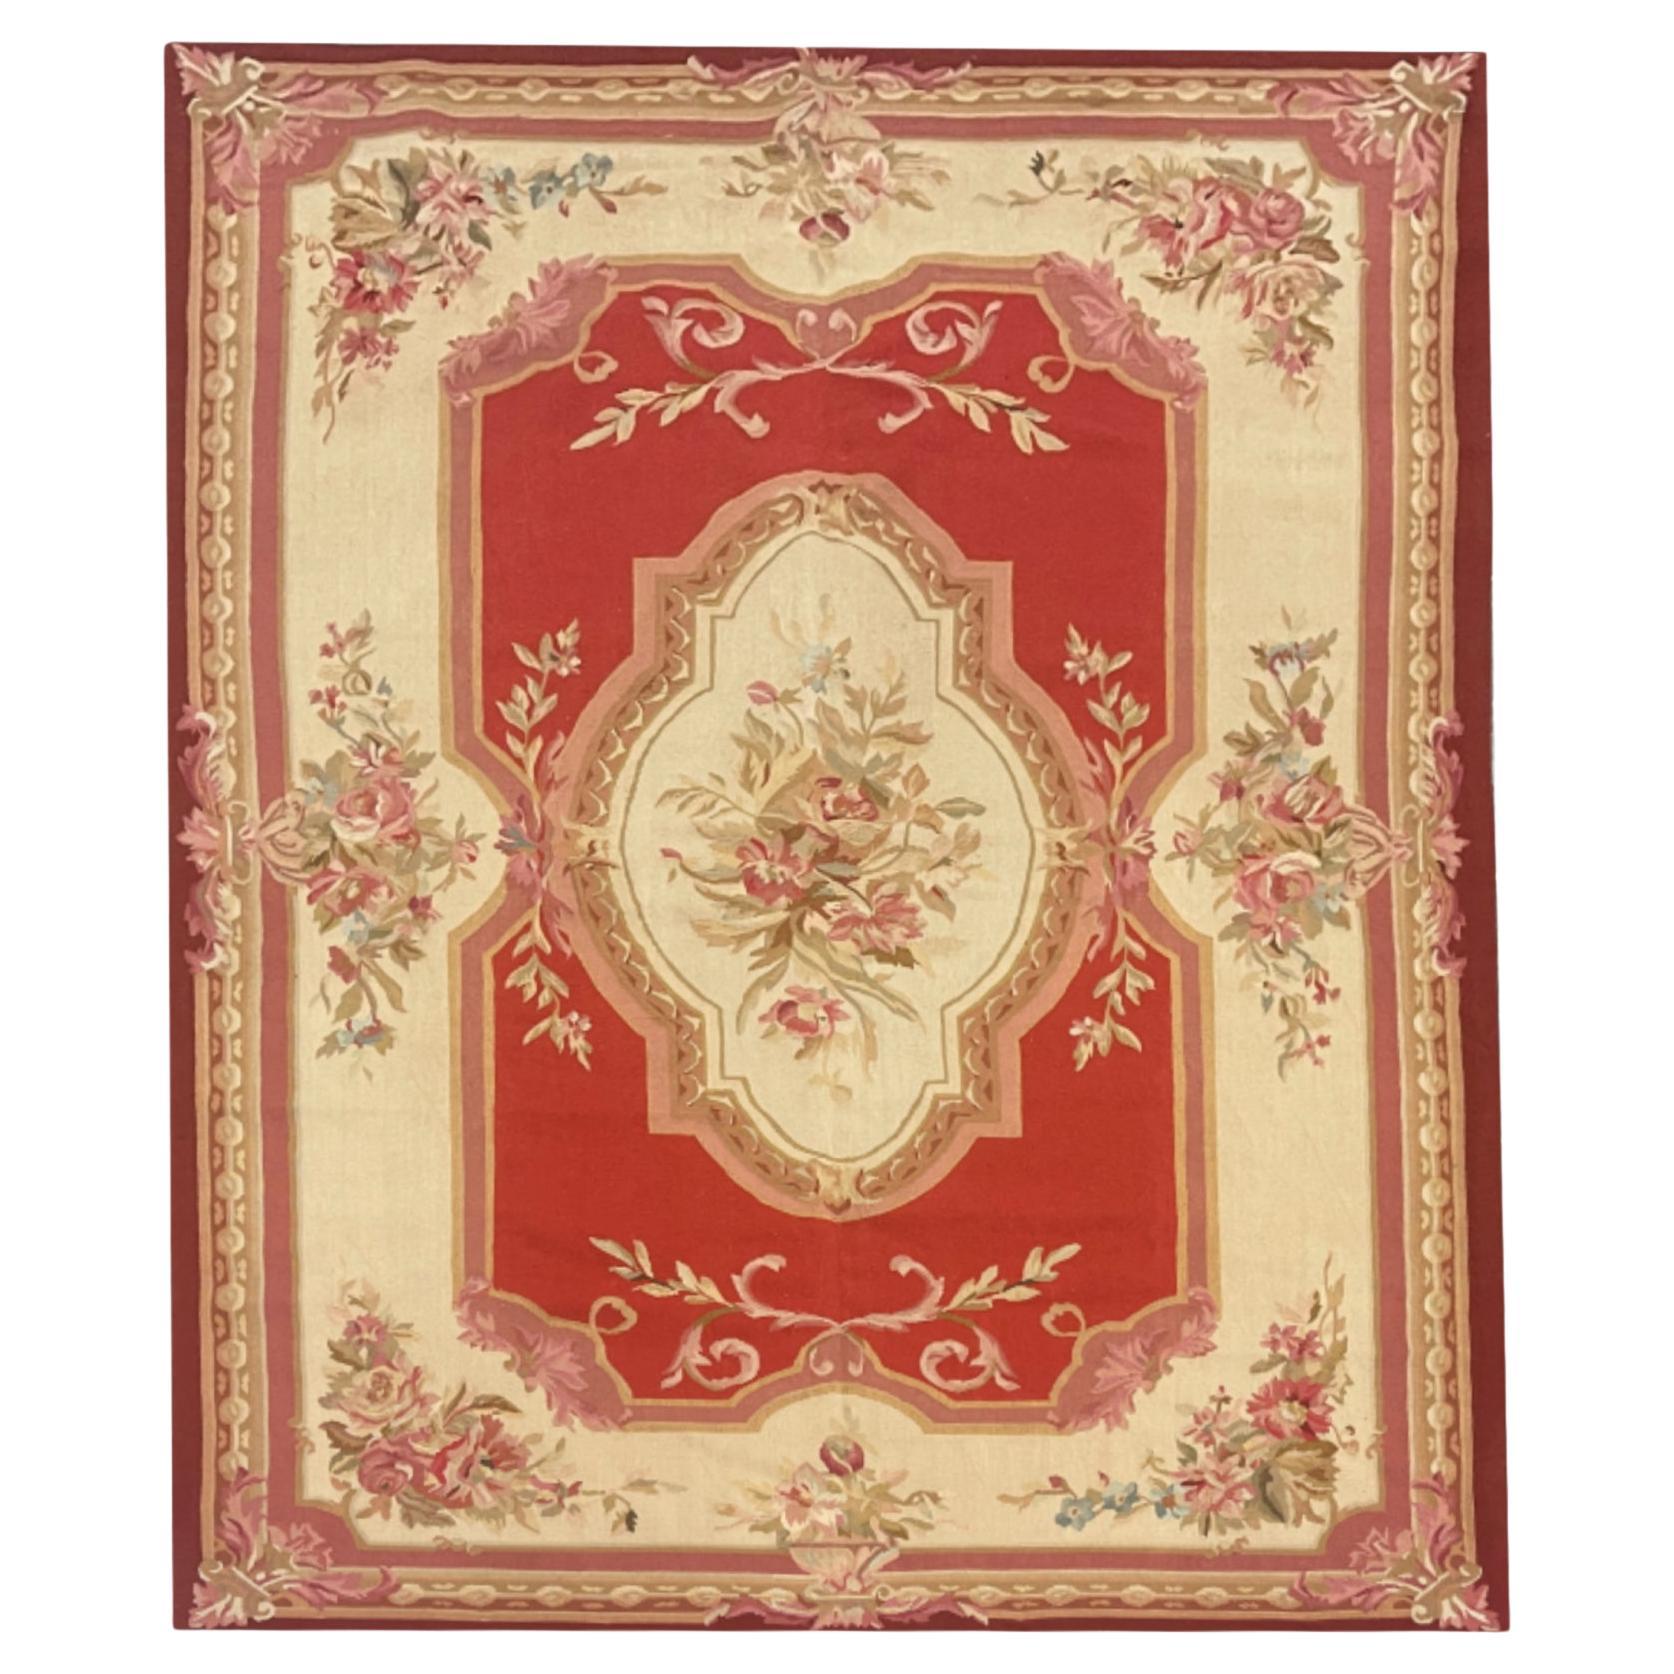 Handmade Carpet Vintage Aubusson Rug 1980 French- Red and Beige Wool Rugs For Sale